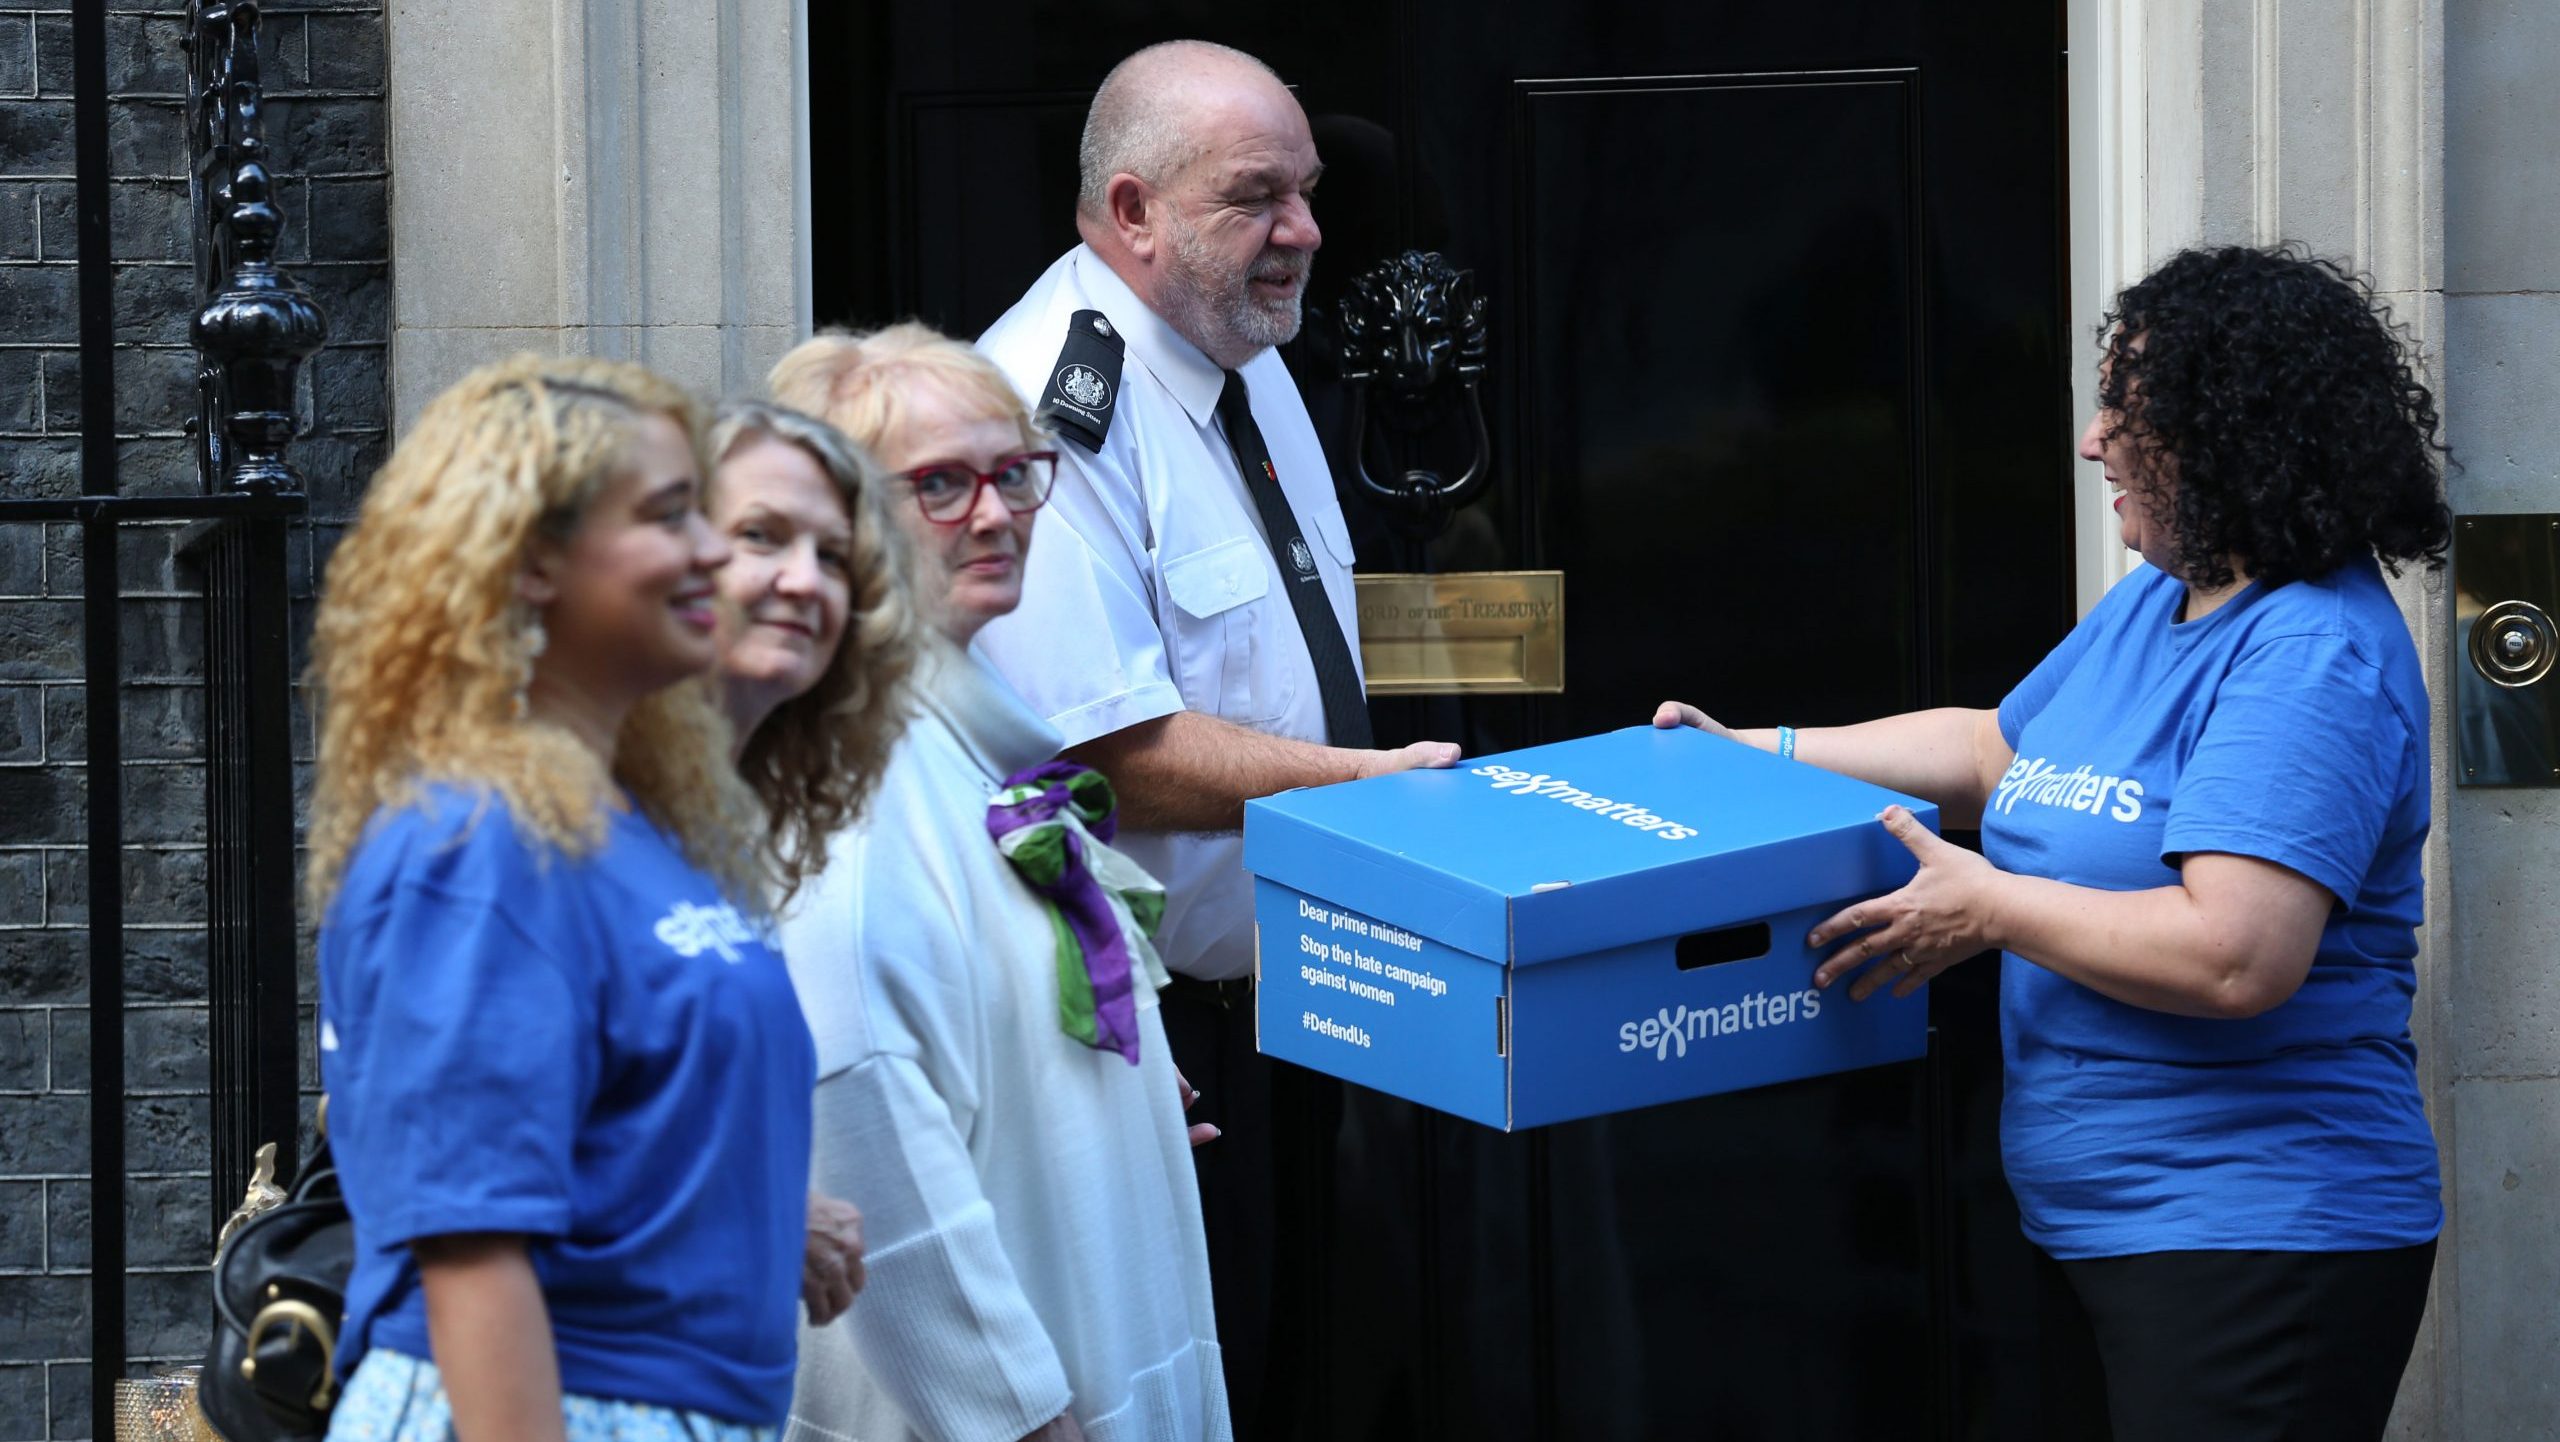 Maya Forstater and other campaigners hand in their letter to 10 Downing Street